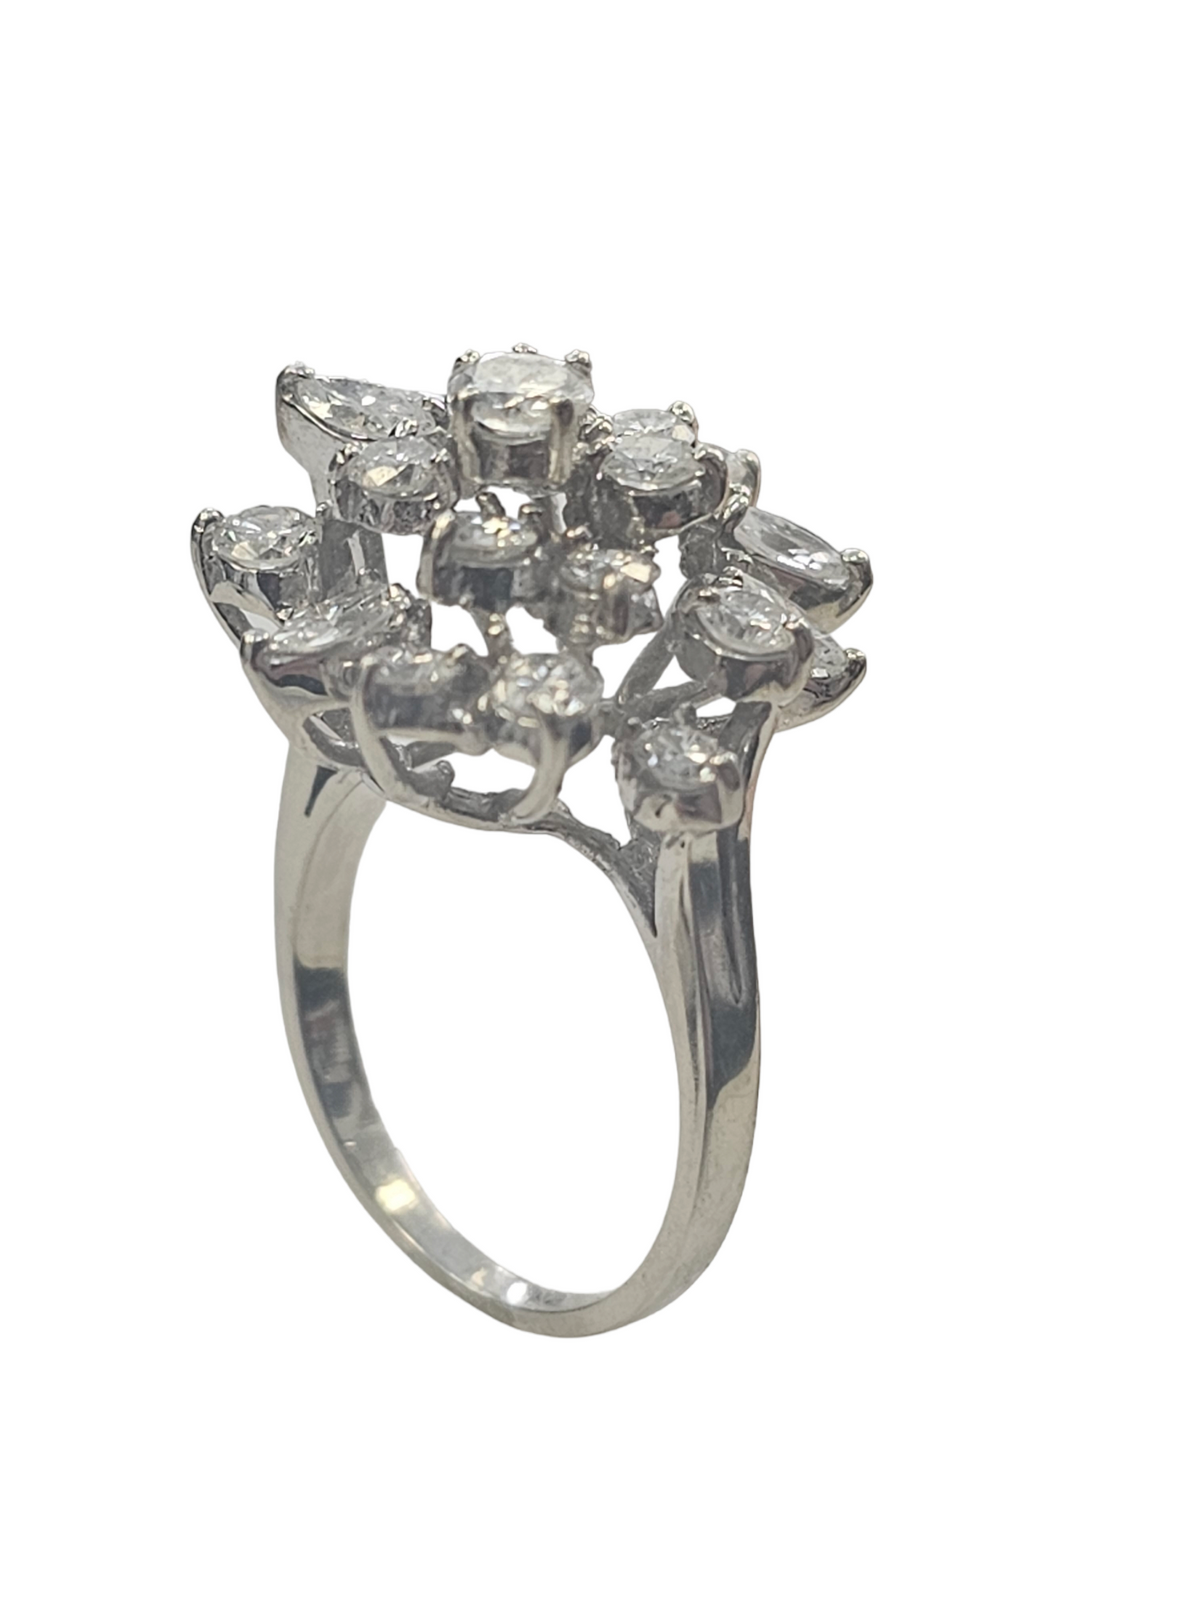 Womens 3.00 Carats Total Weight Diamond Dinner Ring in 14Kt White Gold